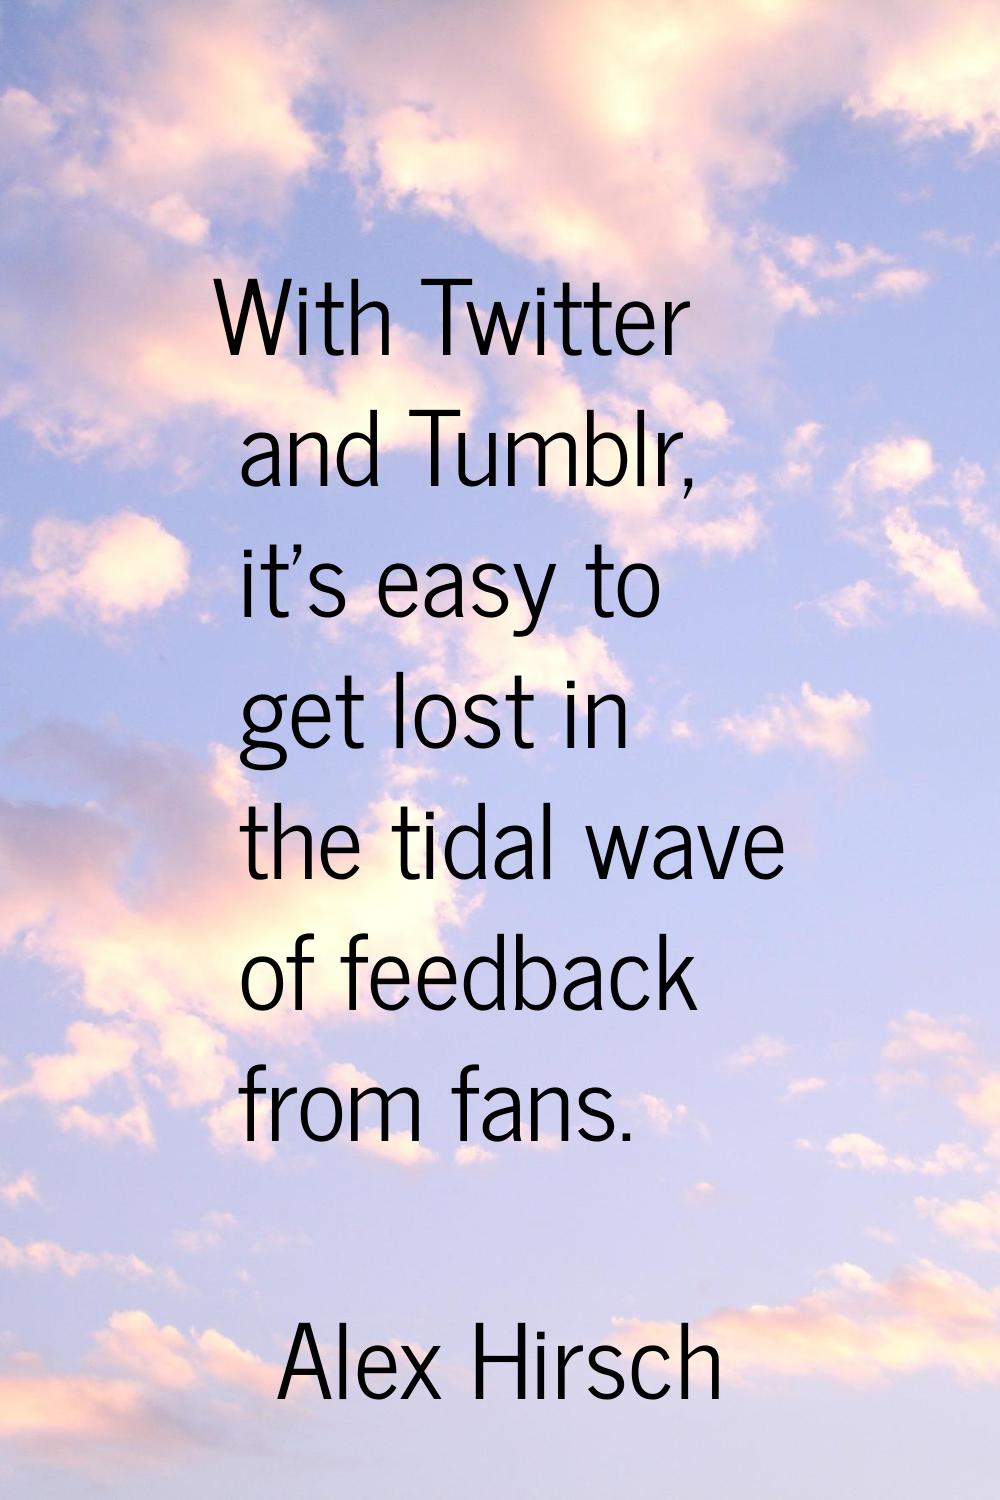 With Twitter and Tumblr, it's easy to get lost in the tidal wave of feedback from fans.